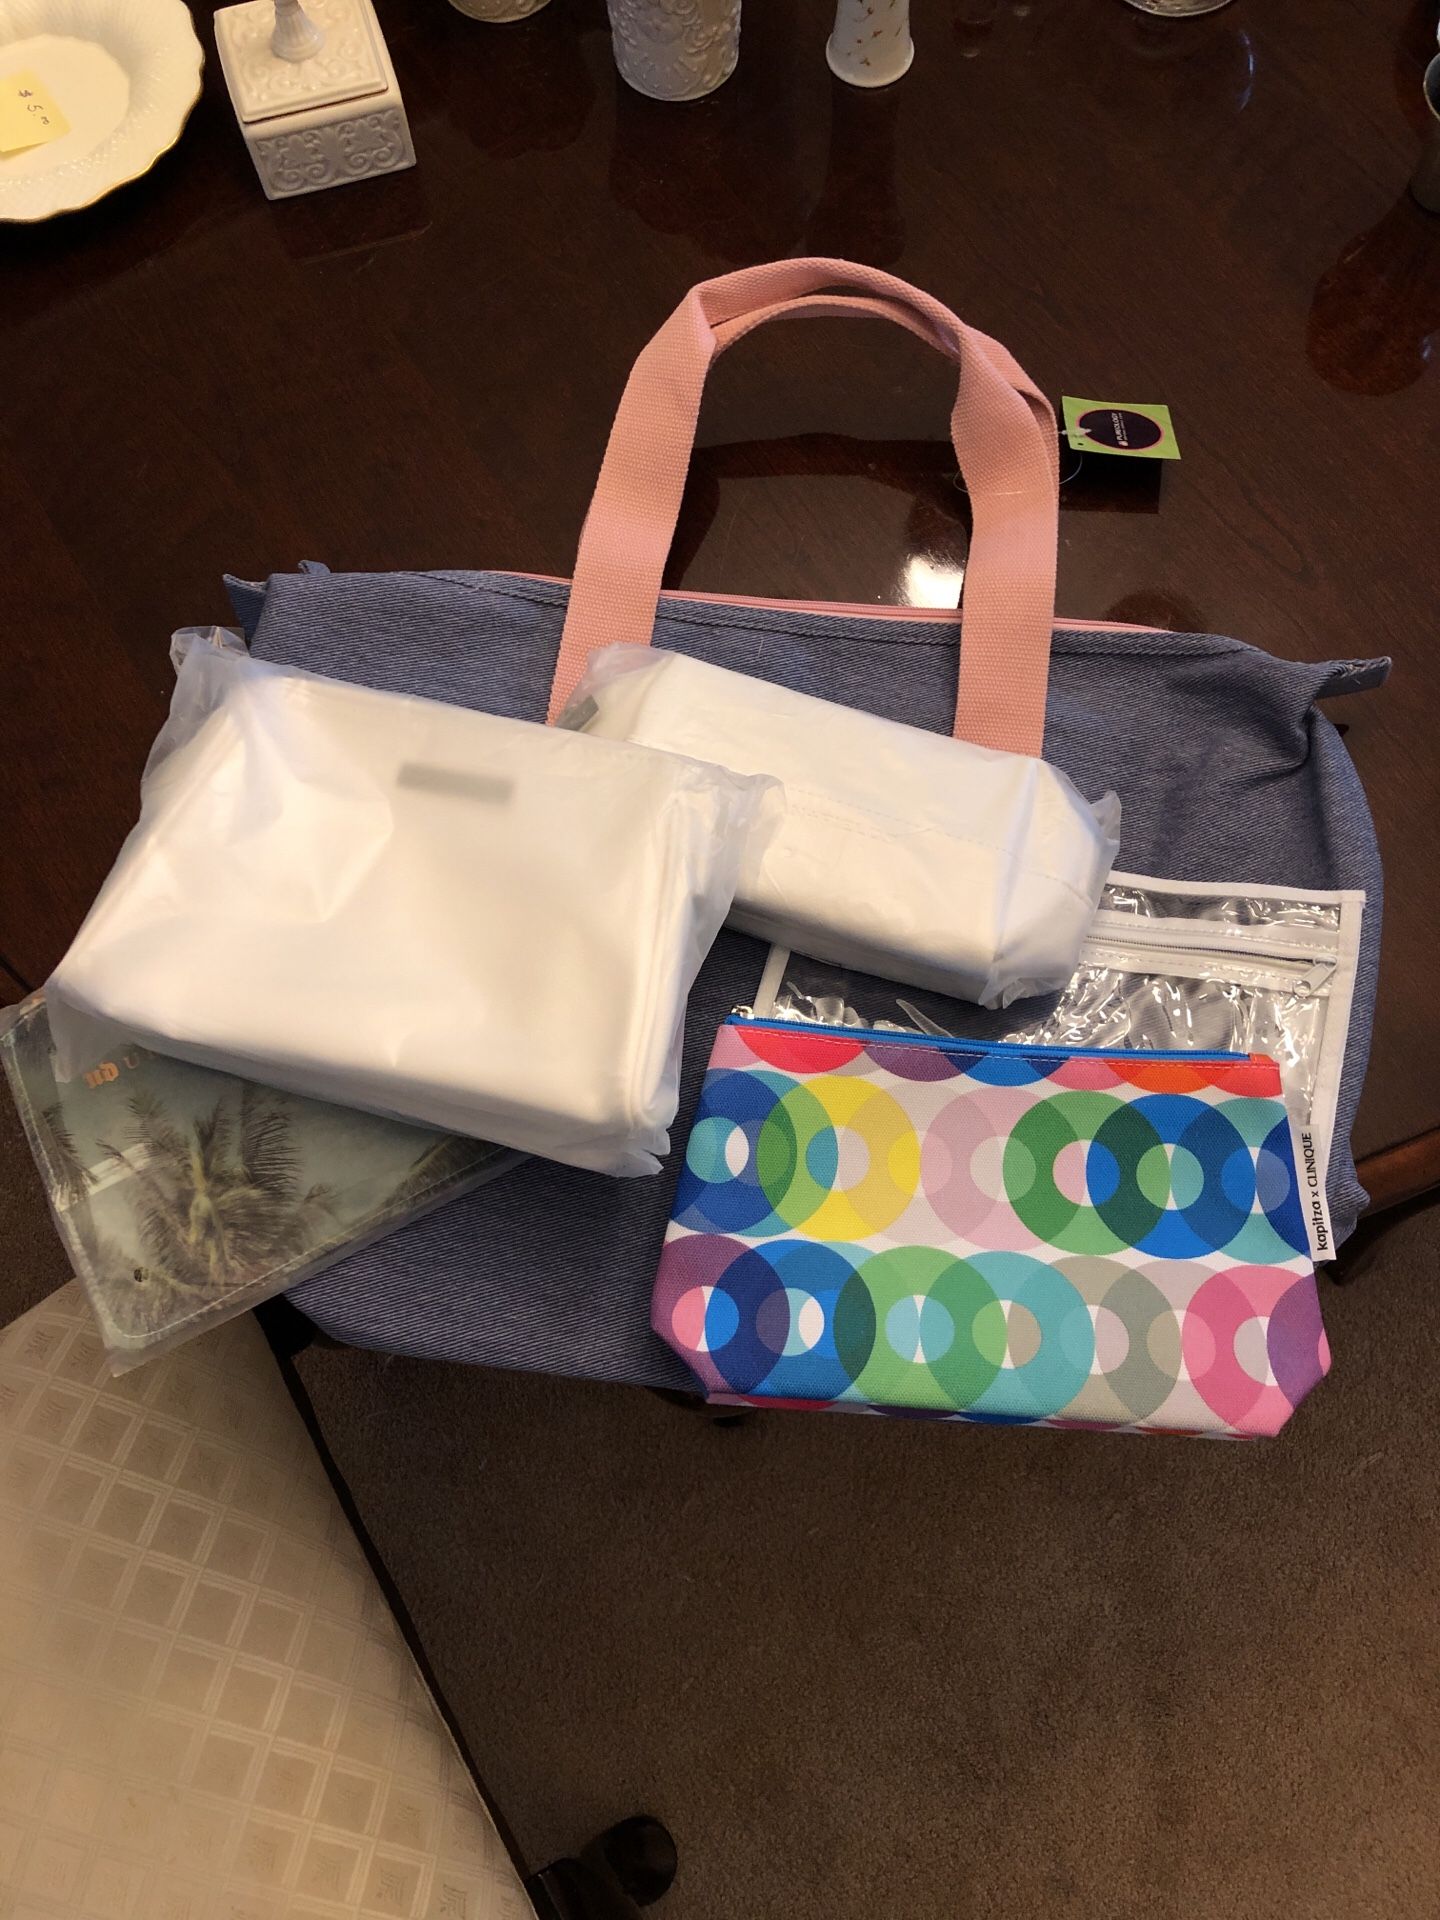 Tote bag and cosmetics bags